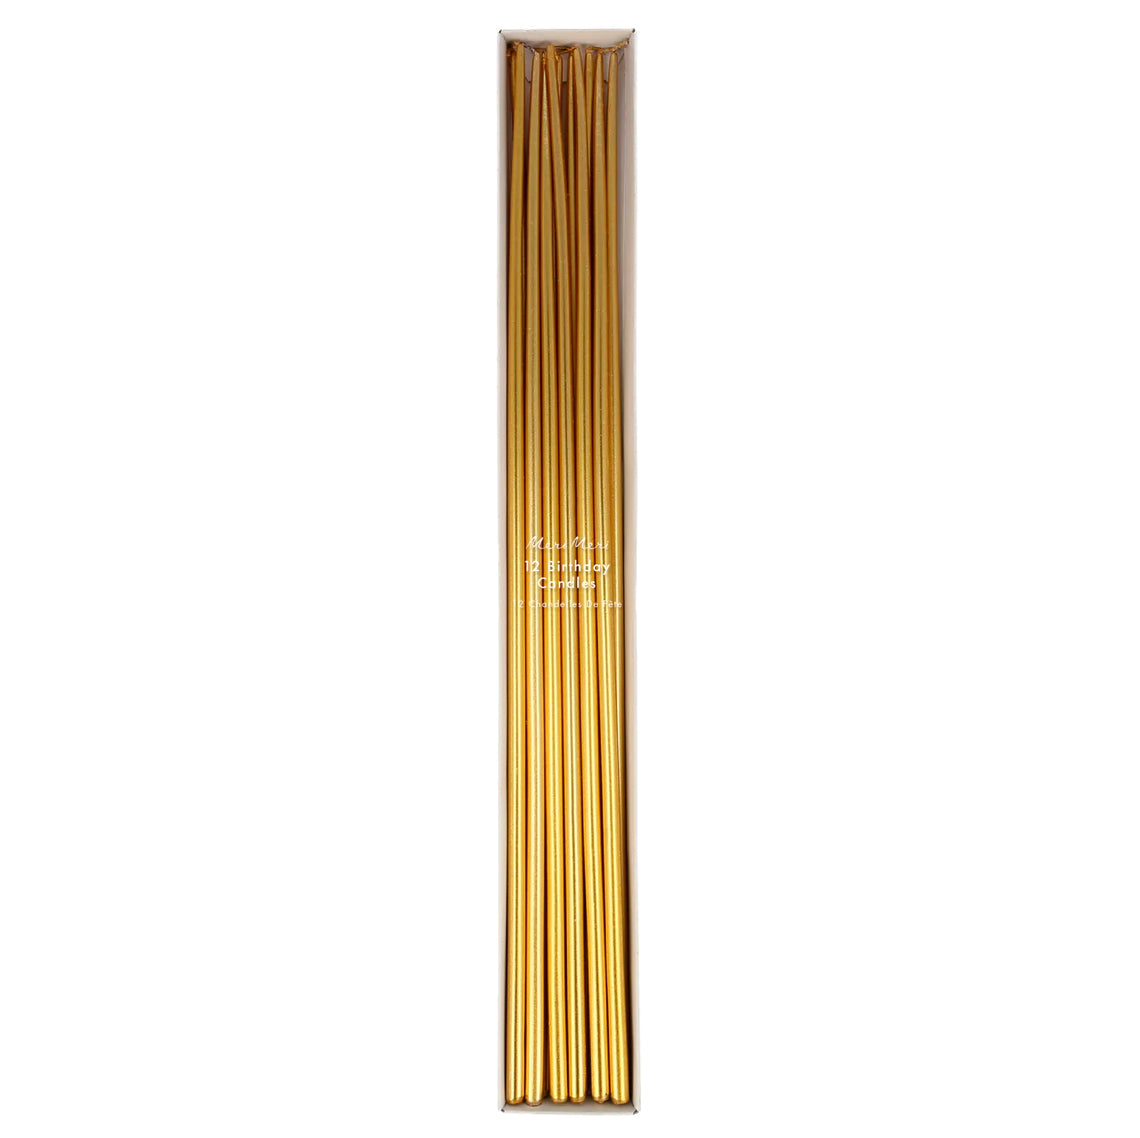 CANDLES - MERI MERI EXTRA TALL TAPERED GOLD